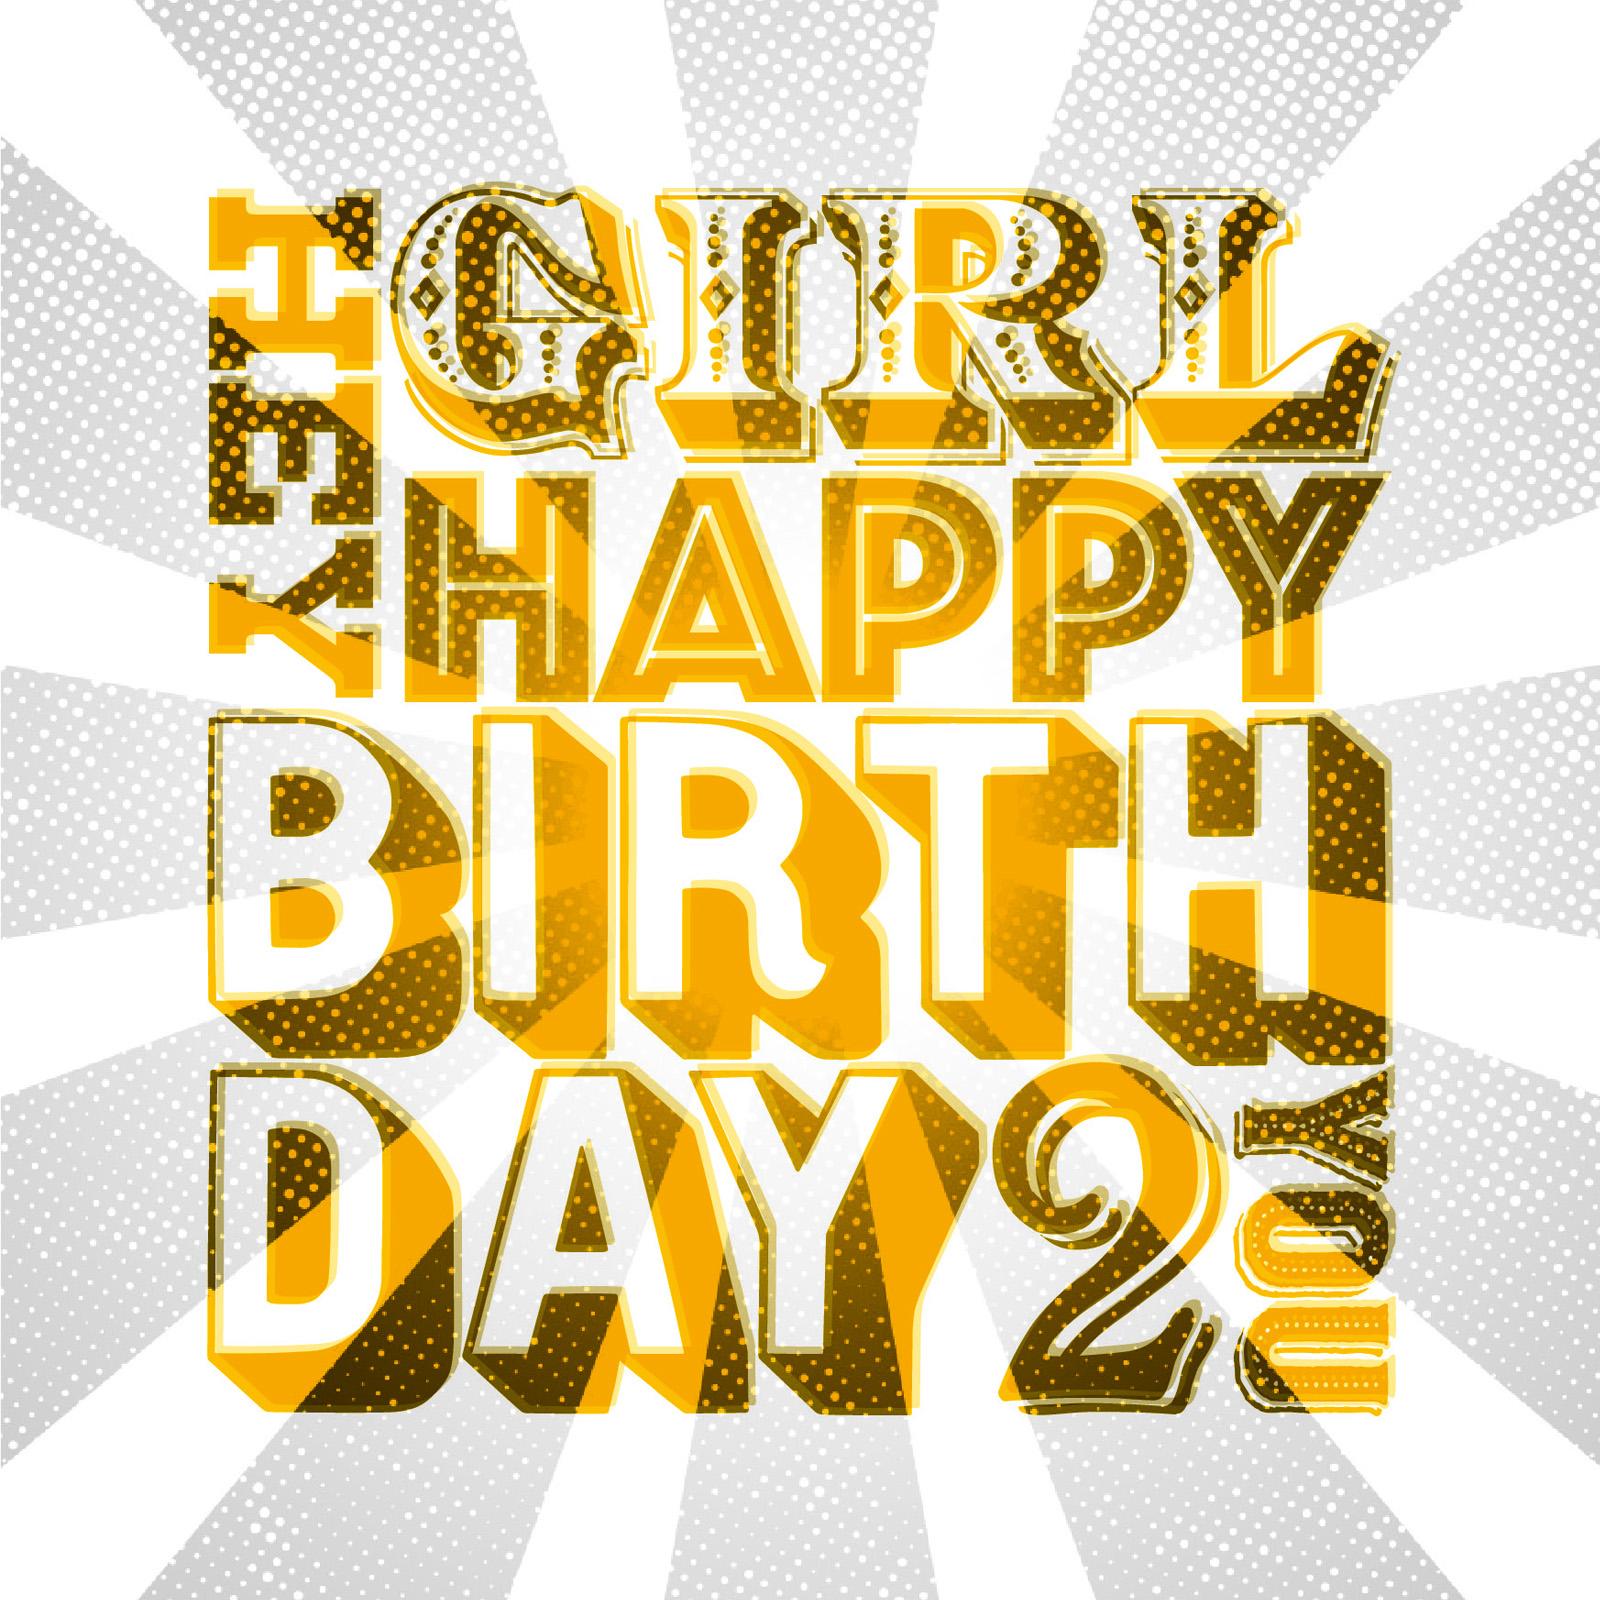 circus-style mix and match typography that reads hey girl happy birthday 2 U in yellow with a grey-coloured distressed starburst background